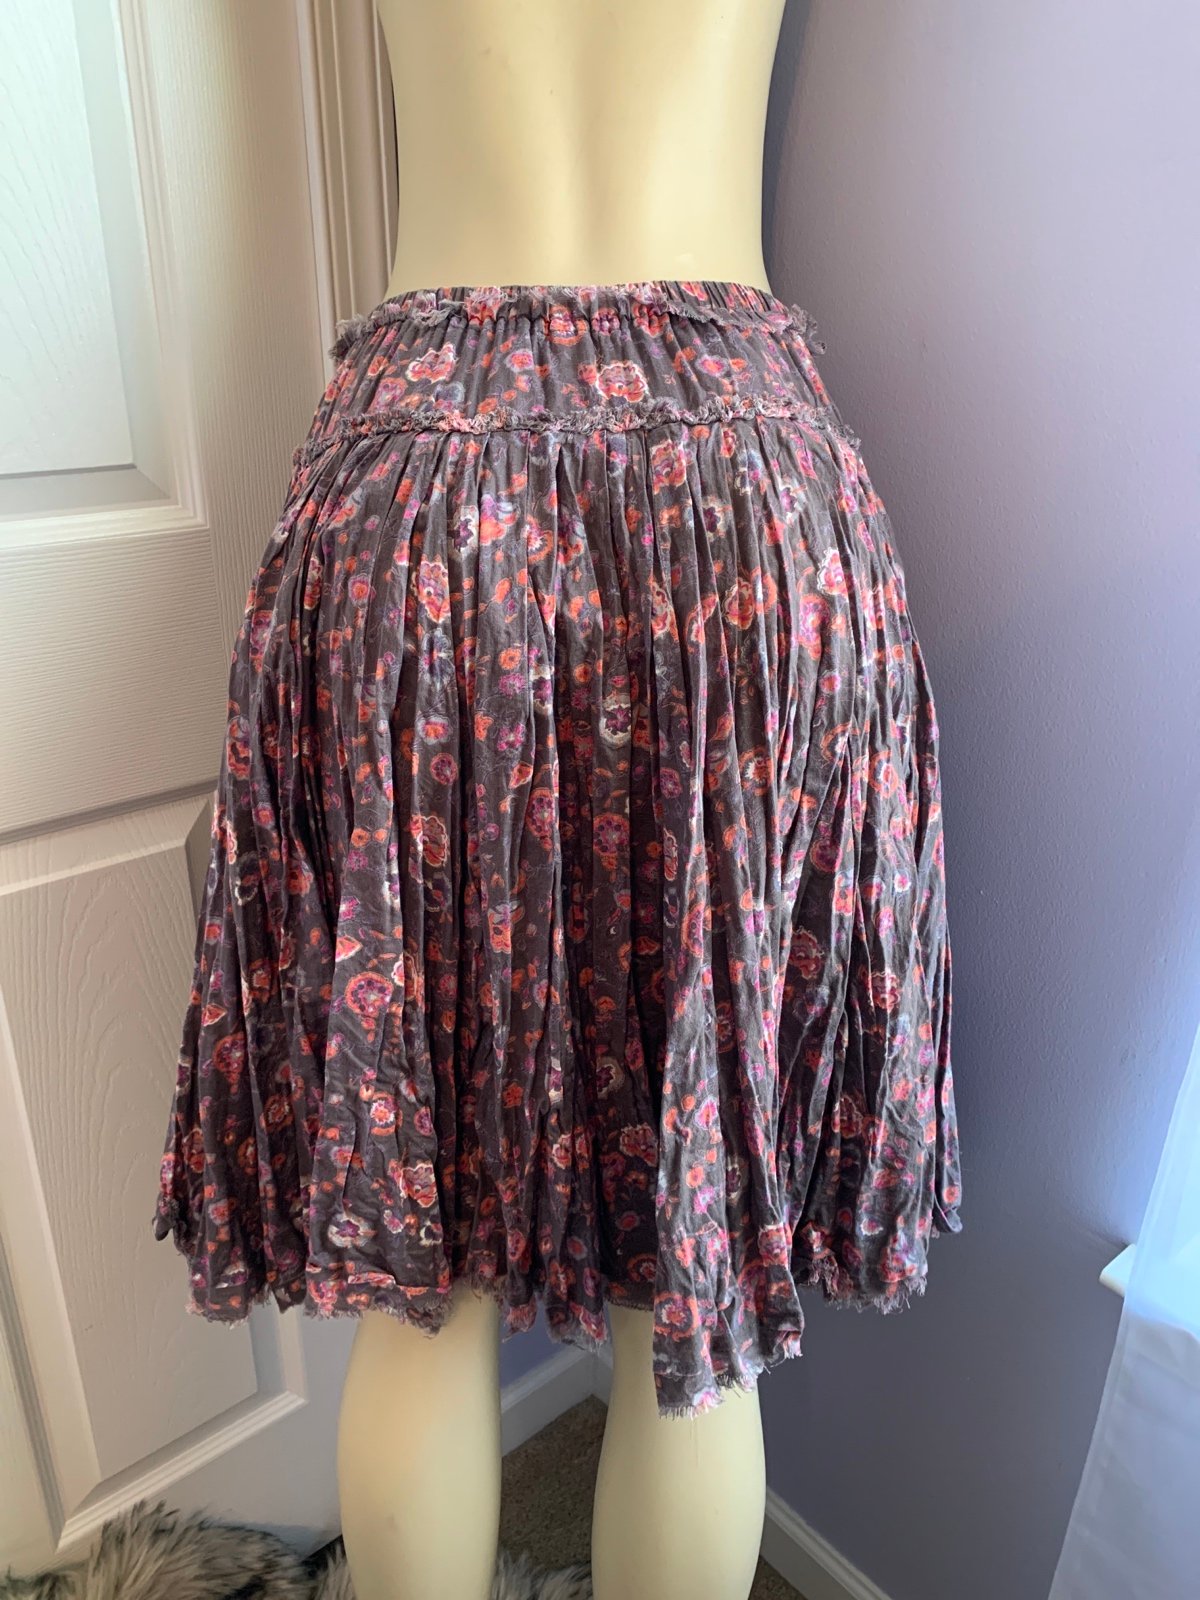 big discount American Eagle Outfitters Crinkle Fun Flirty Casual Skirt XS pIVFaUhq4 Low Price